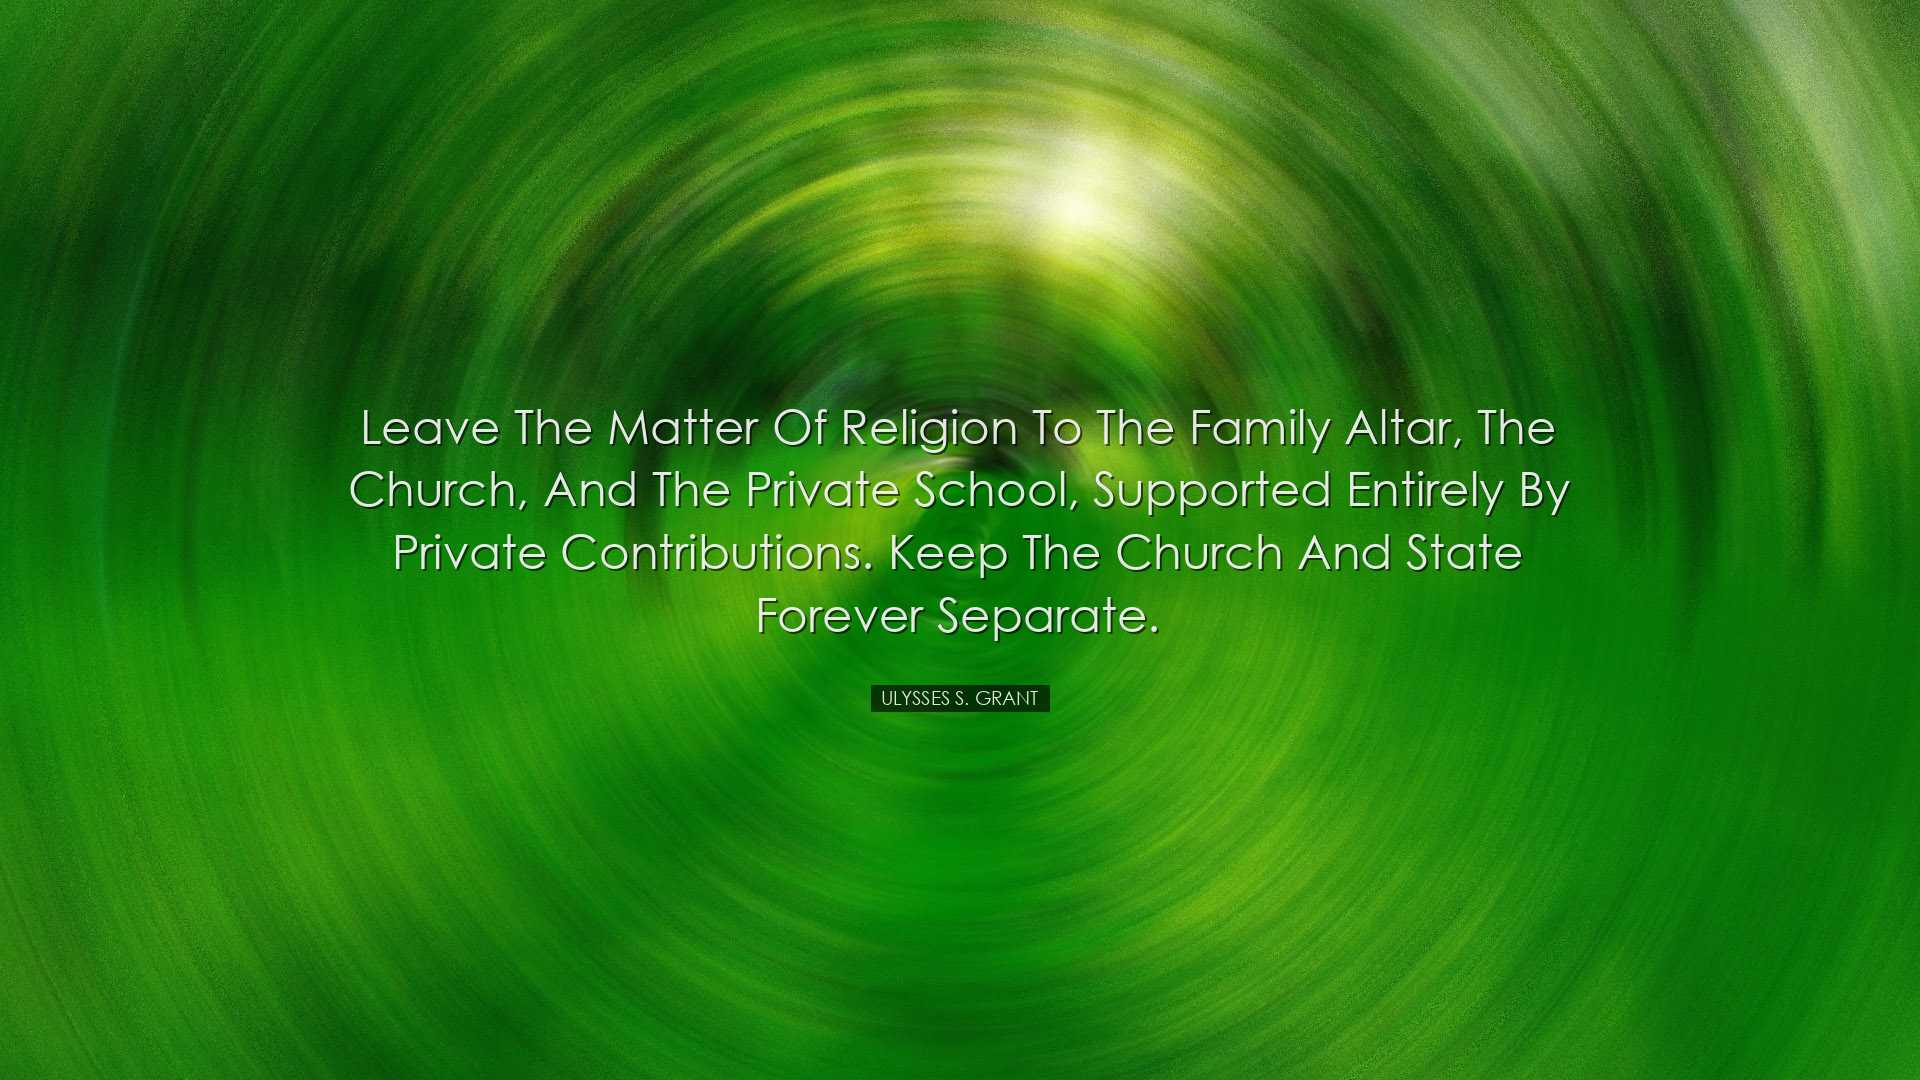 Leave the matter of religion to the family altar, the church, and